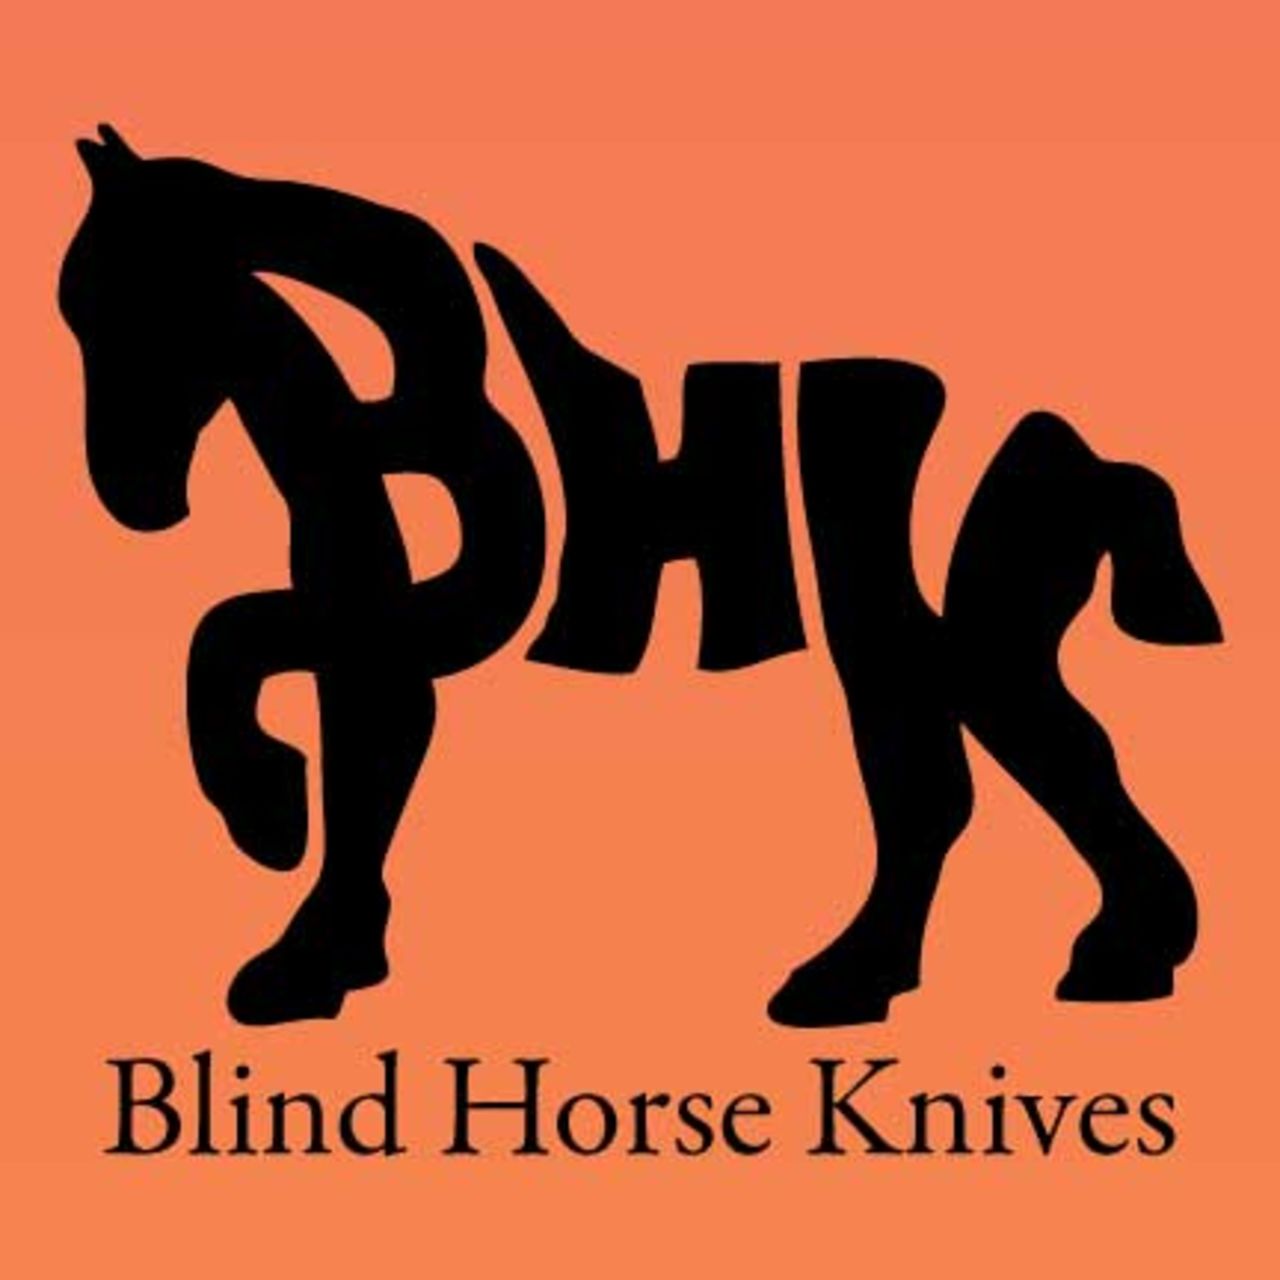 The name comes from an old family tale from Wright's side of the family. The story goes that a relative of Wright's used minimal tools and the help of a blind horse to build a shed.